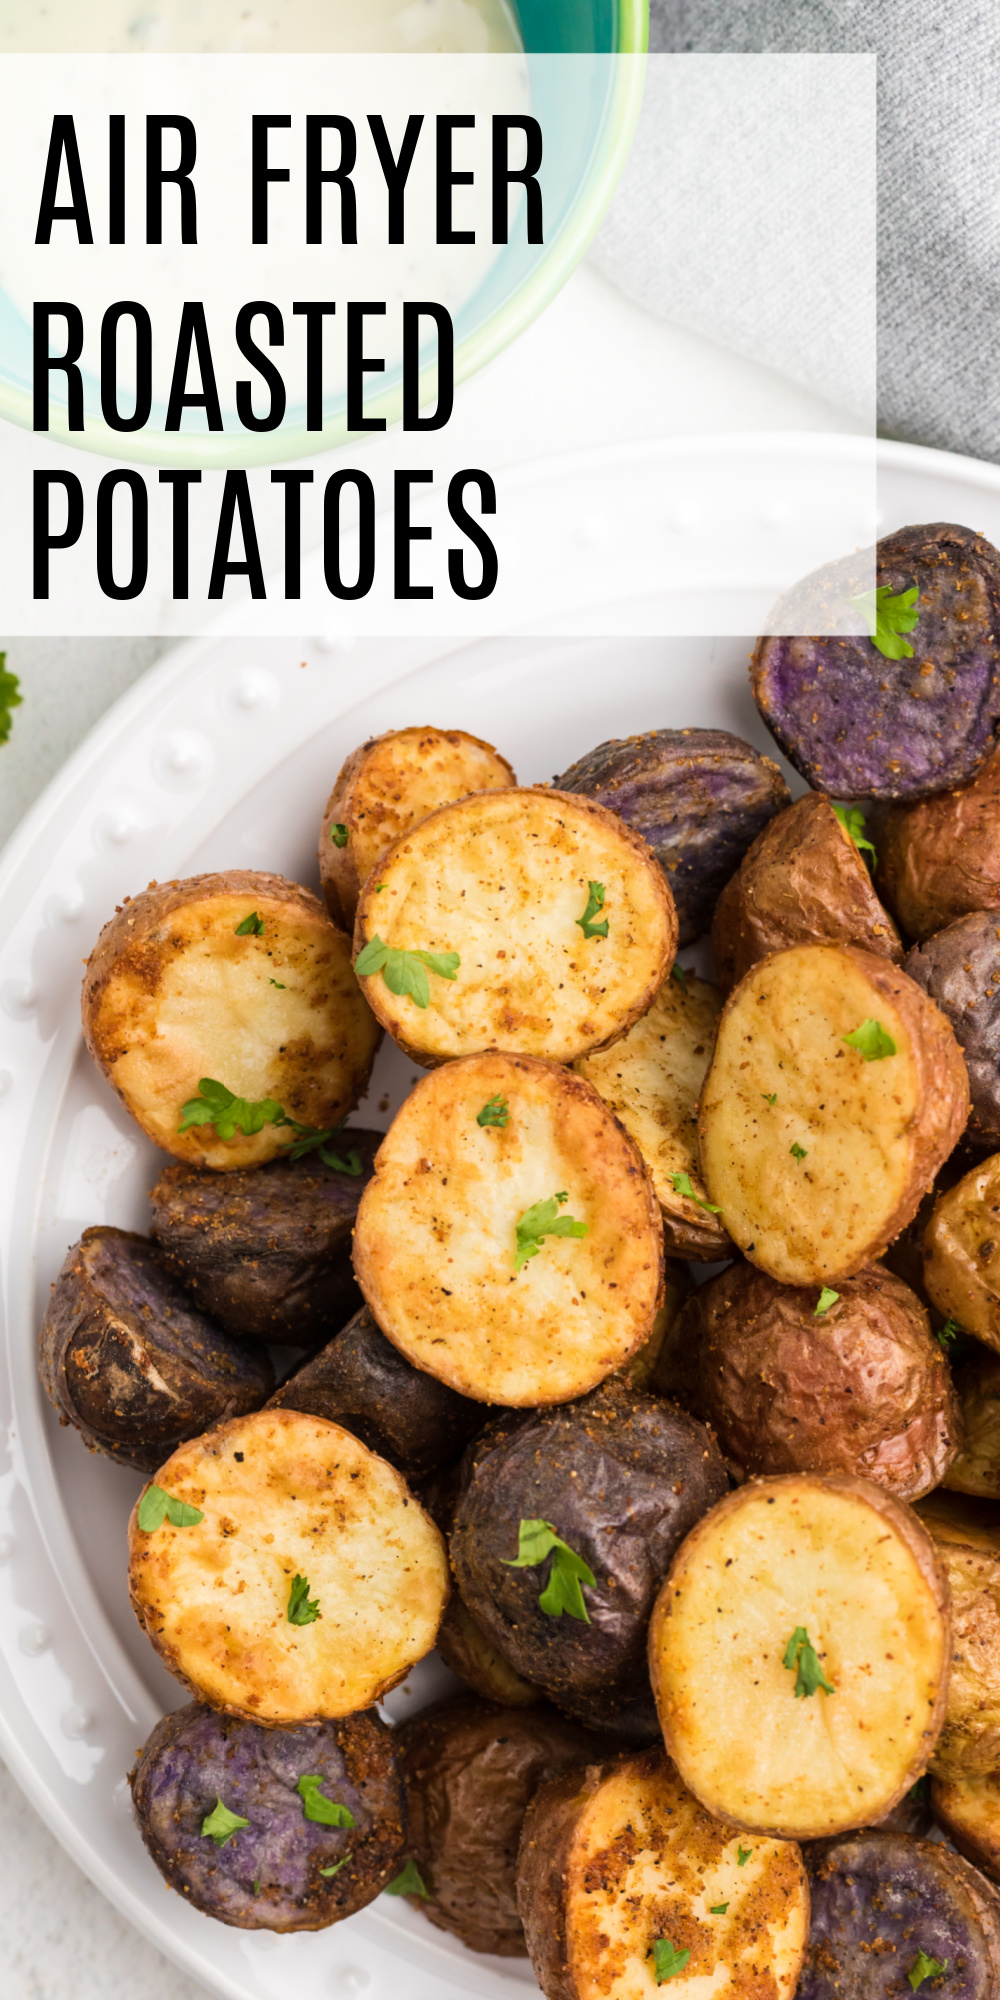 Air Fryer Roasted Potatoes are made with petite medley potatoes, olive oil, and the perfect blend of seasonings to make this the perfect air fryer side dish. If you're looking for an easy appetizer or side dish to make in the air fryer, look no further than this air fryer baby potatoes recipe.